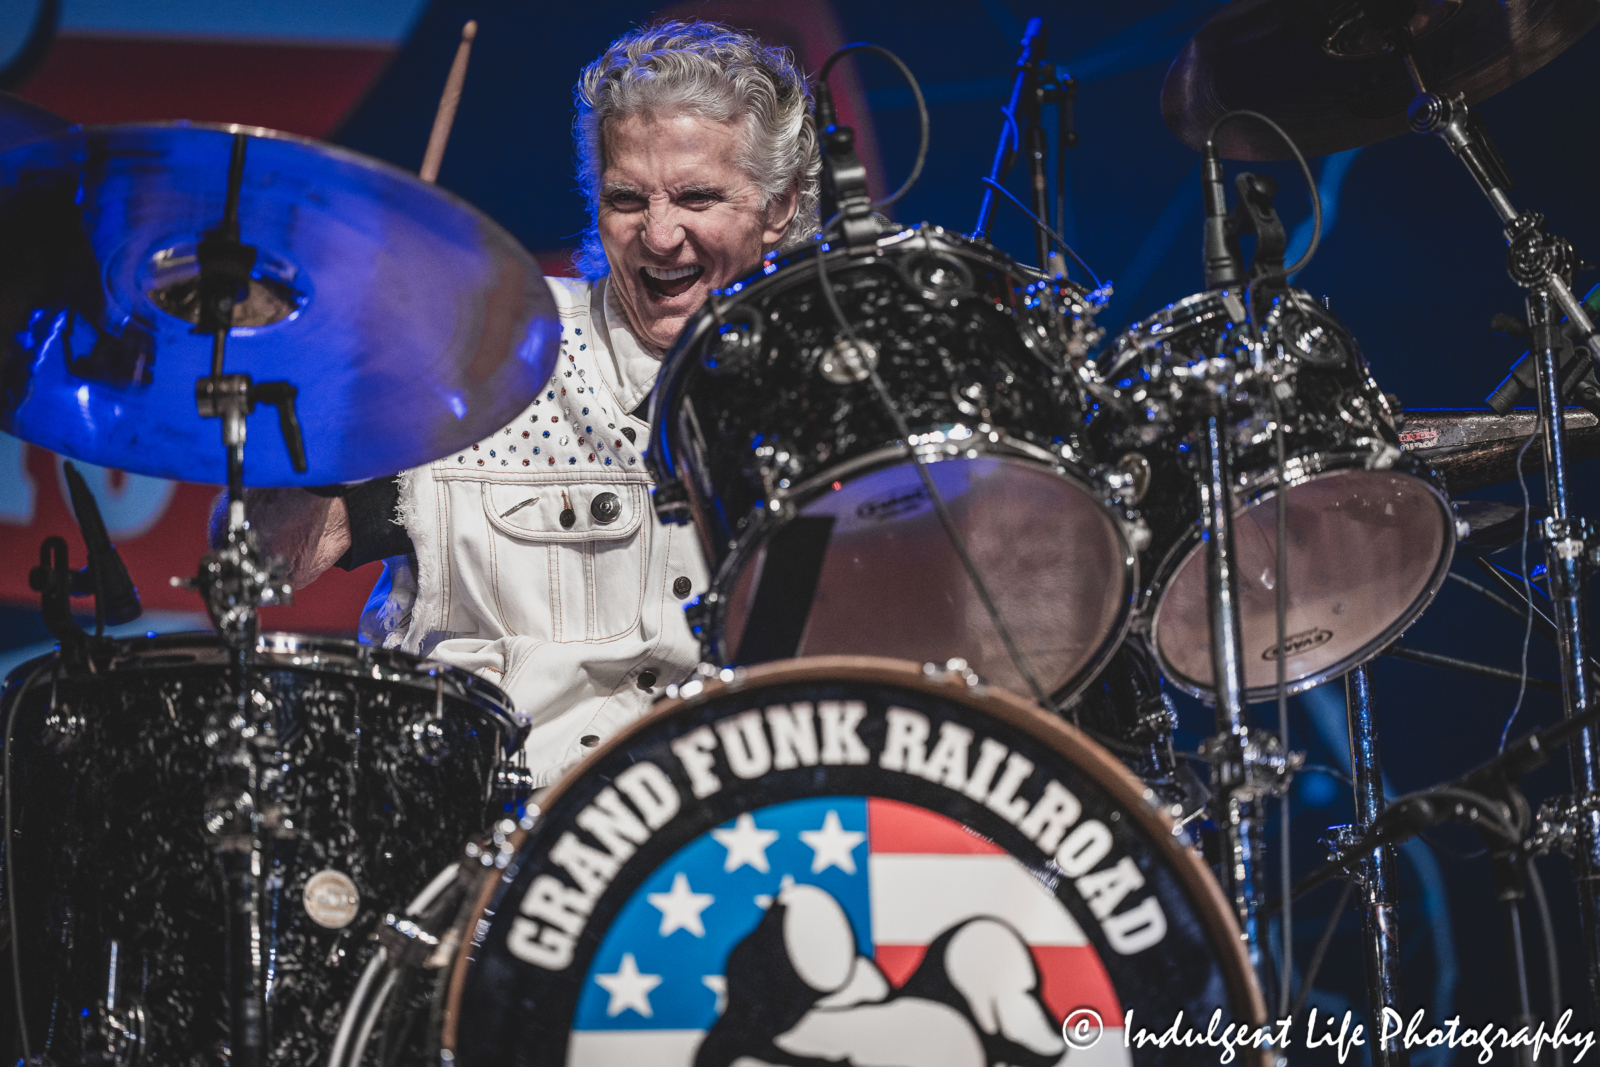 Grand Funk Railroad founding member and drummer Don Brewer opening the band's show with "Rock & Roll Soul" at Ameristar Casino in Kansas City, MO on June 21, 2024.